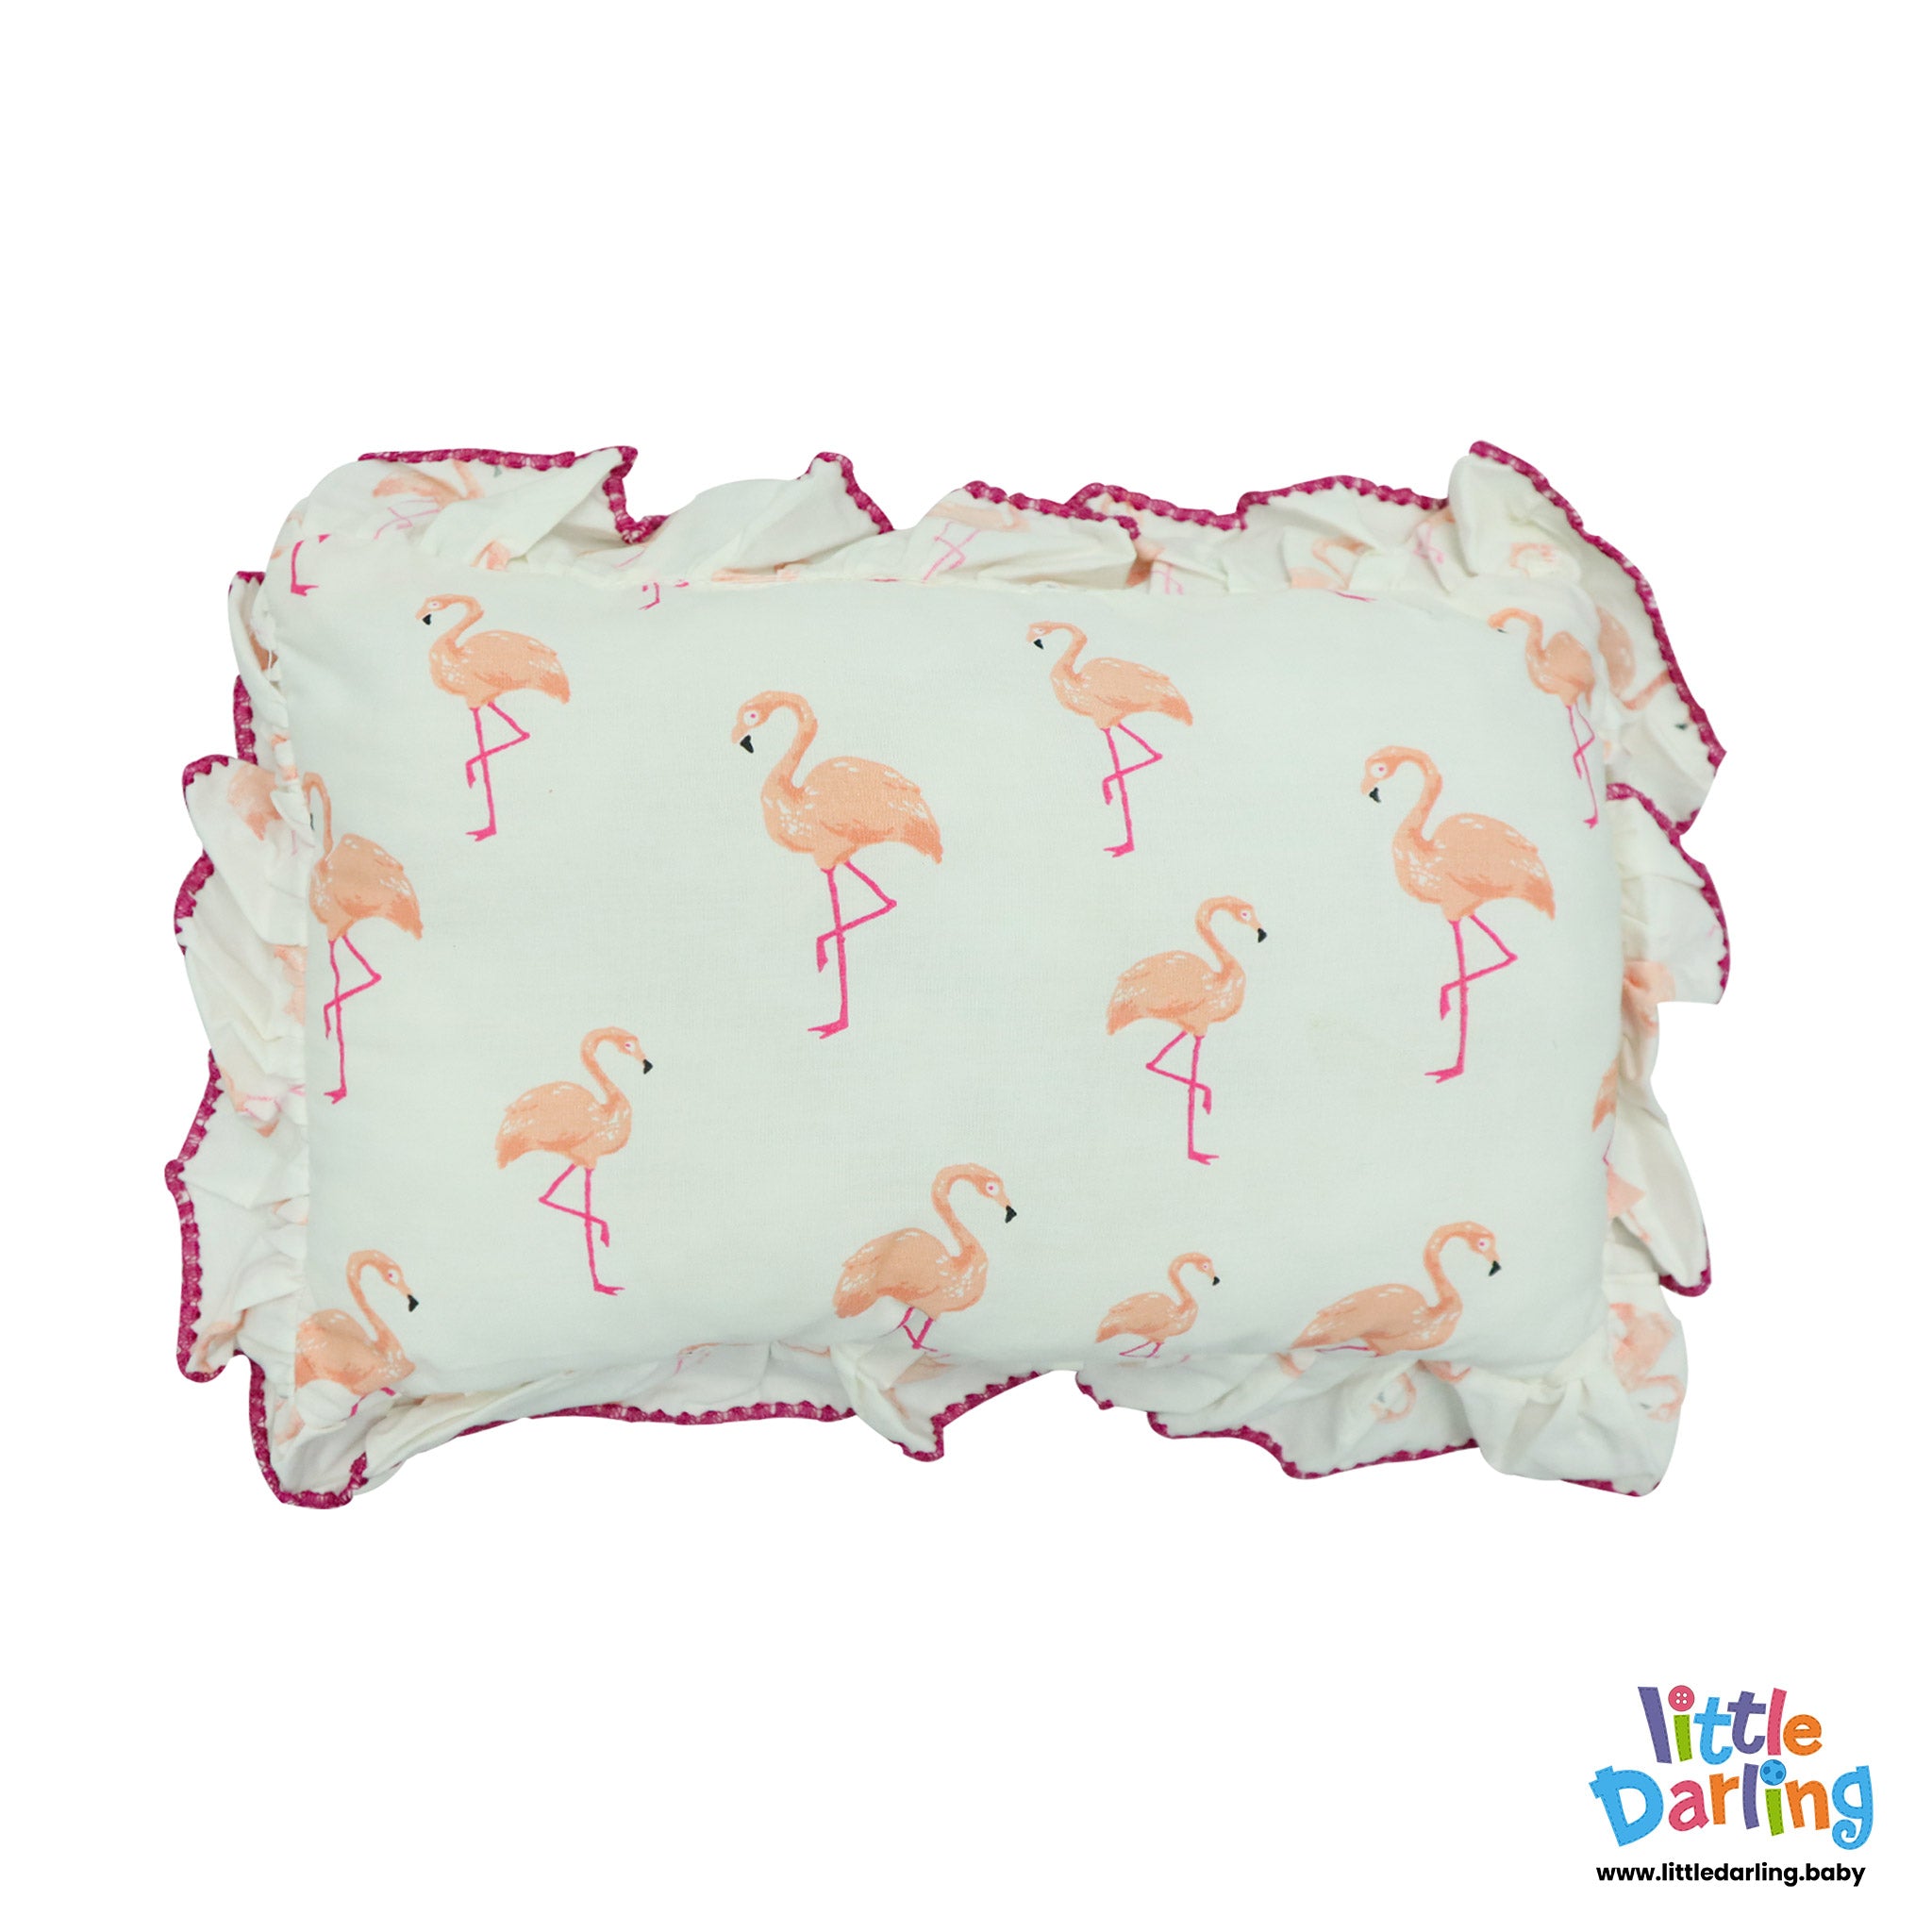 Baby 3 Pillow Set Flamingo Print White Color by Little Darling